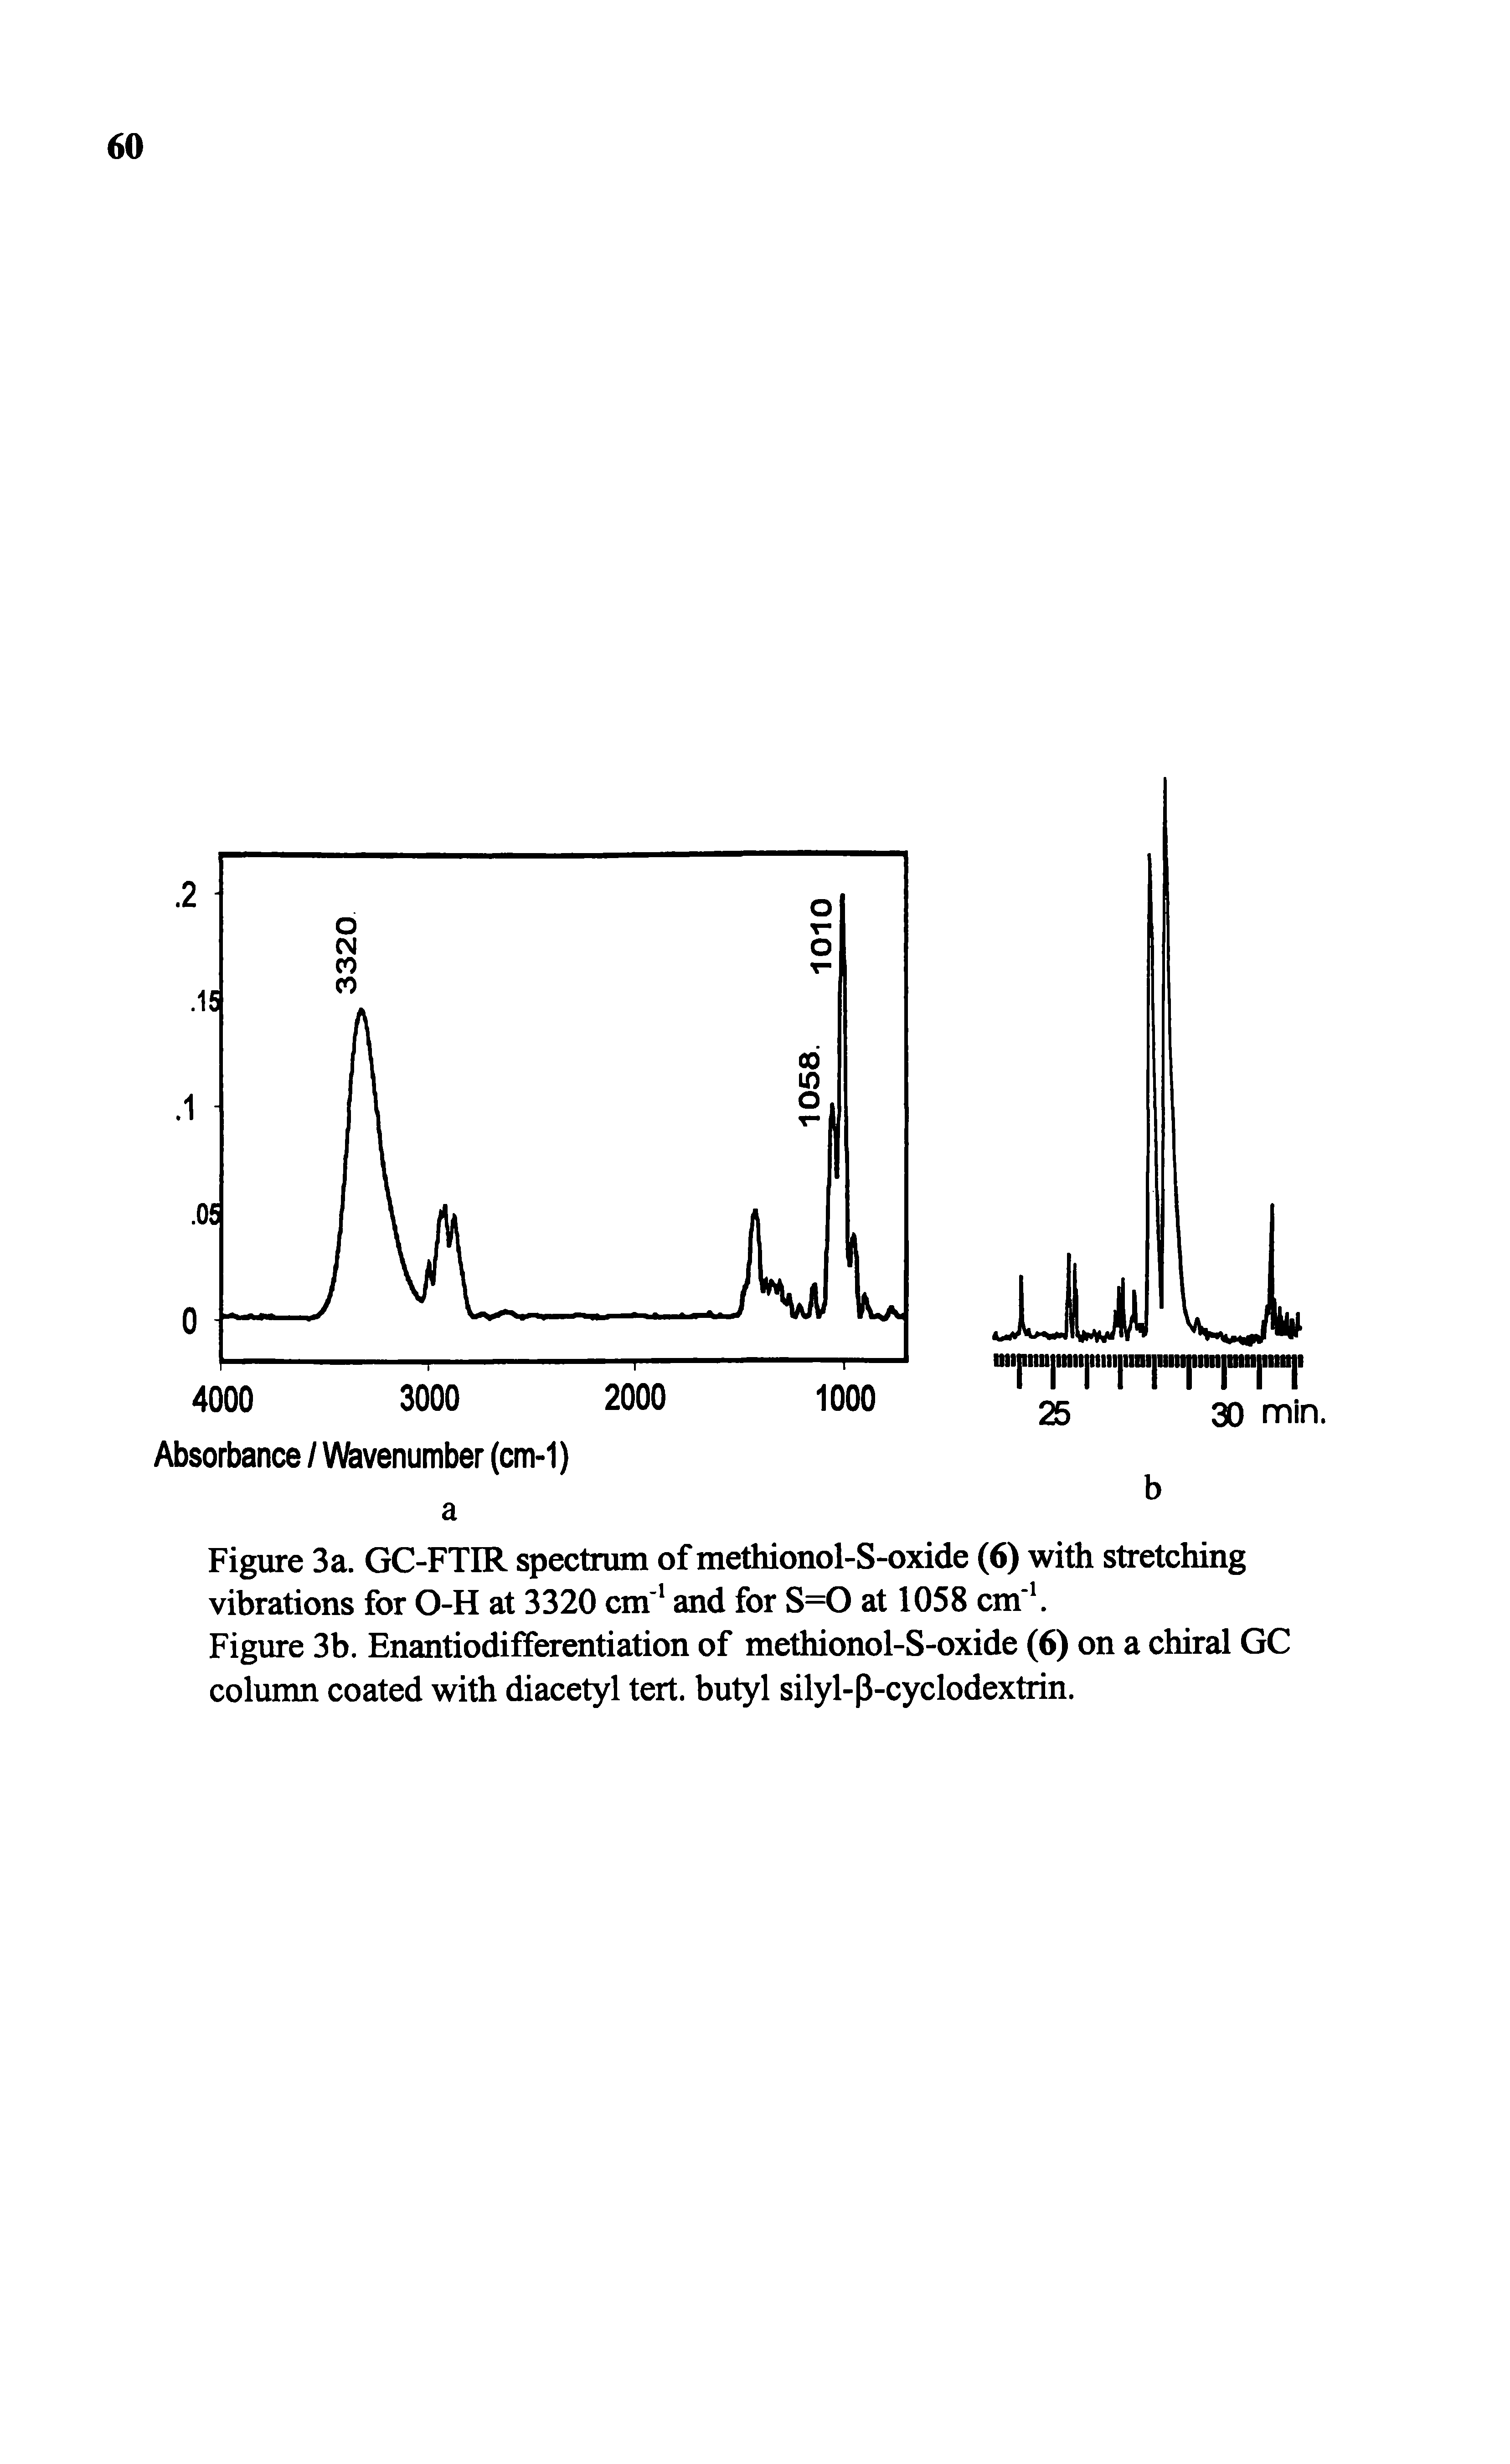 Figure 3b. Enantiodifferentiation of methionol-S-oxide (6) on a chiral GC column coated with diacetyl tert. butyl silyl-P-cyclodextrin.